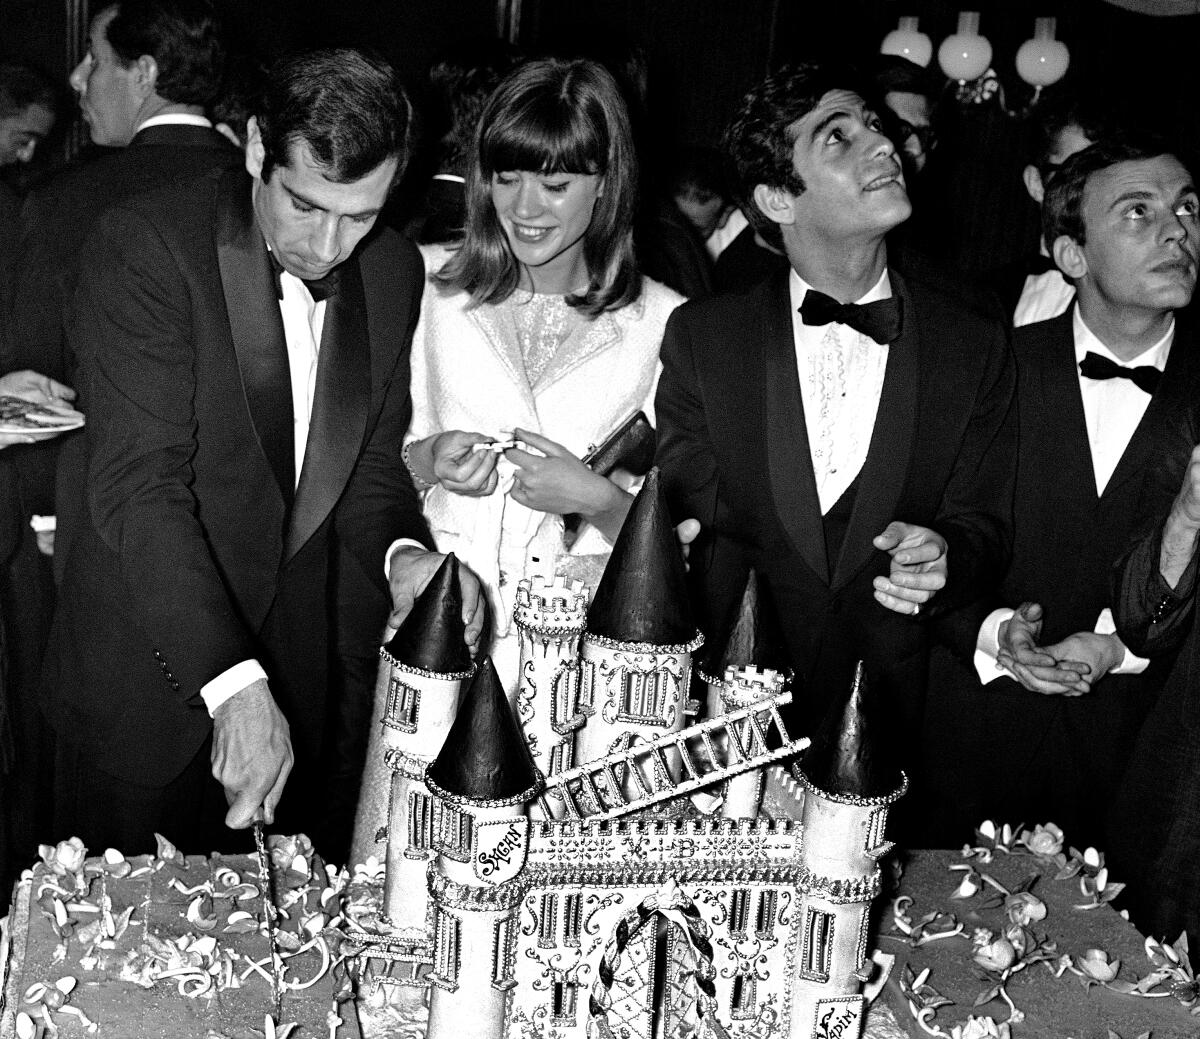 A man, standing next to a woman and two other men, cutting a large castle-shaped cake